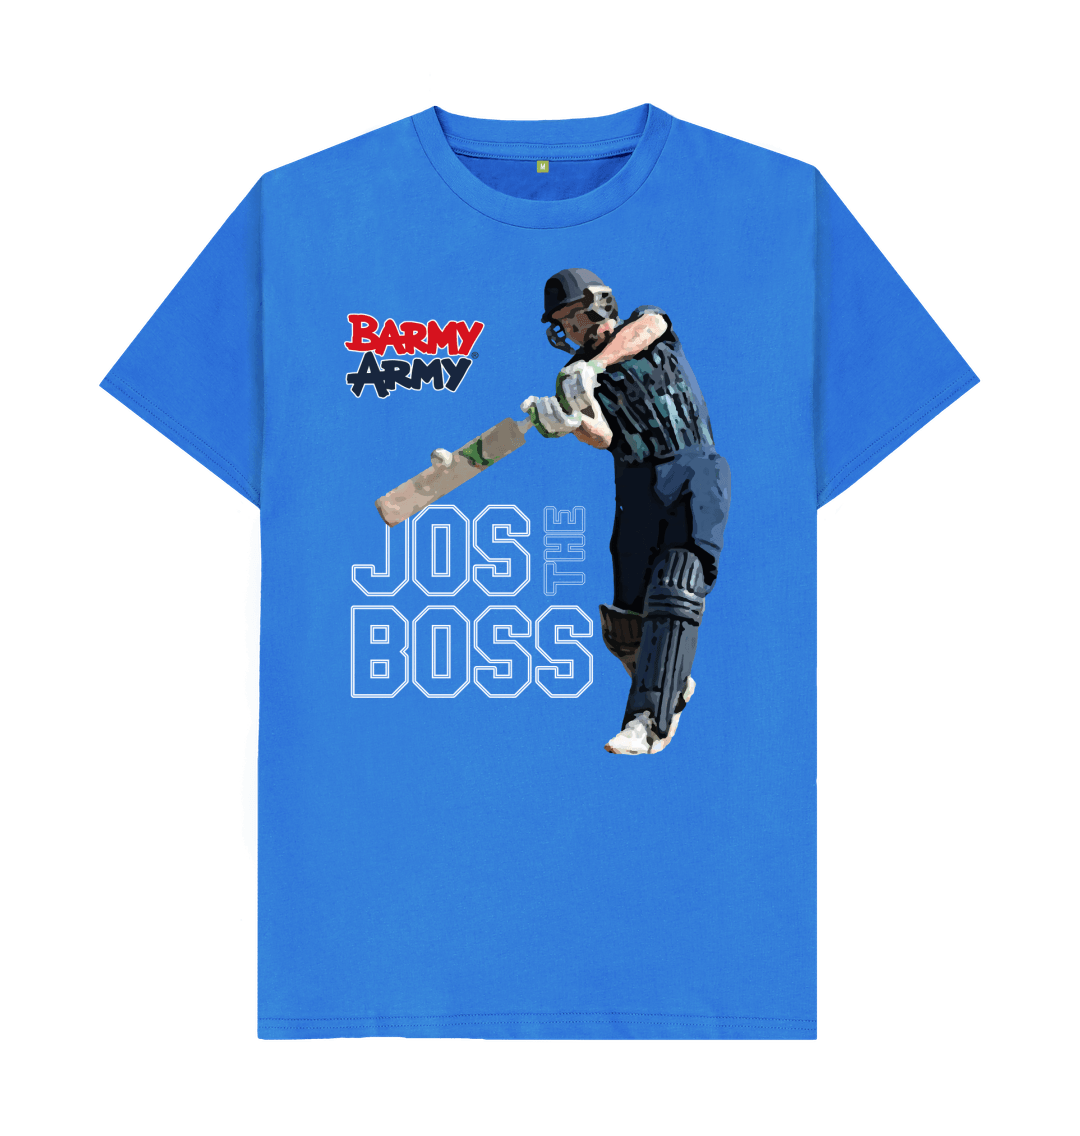 Bright Blue Barmy Army The Boss Tee - Mens